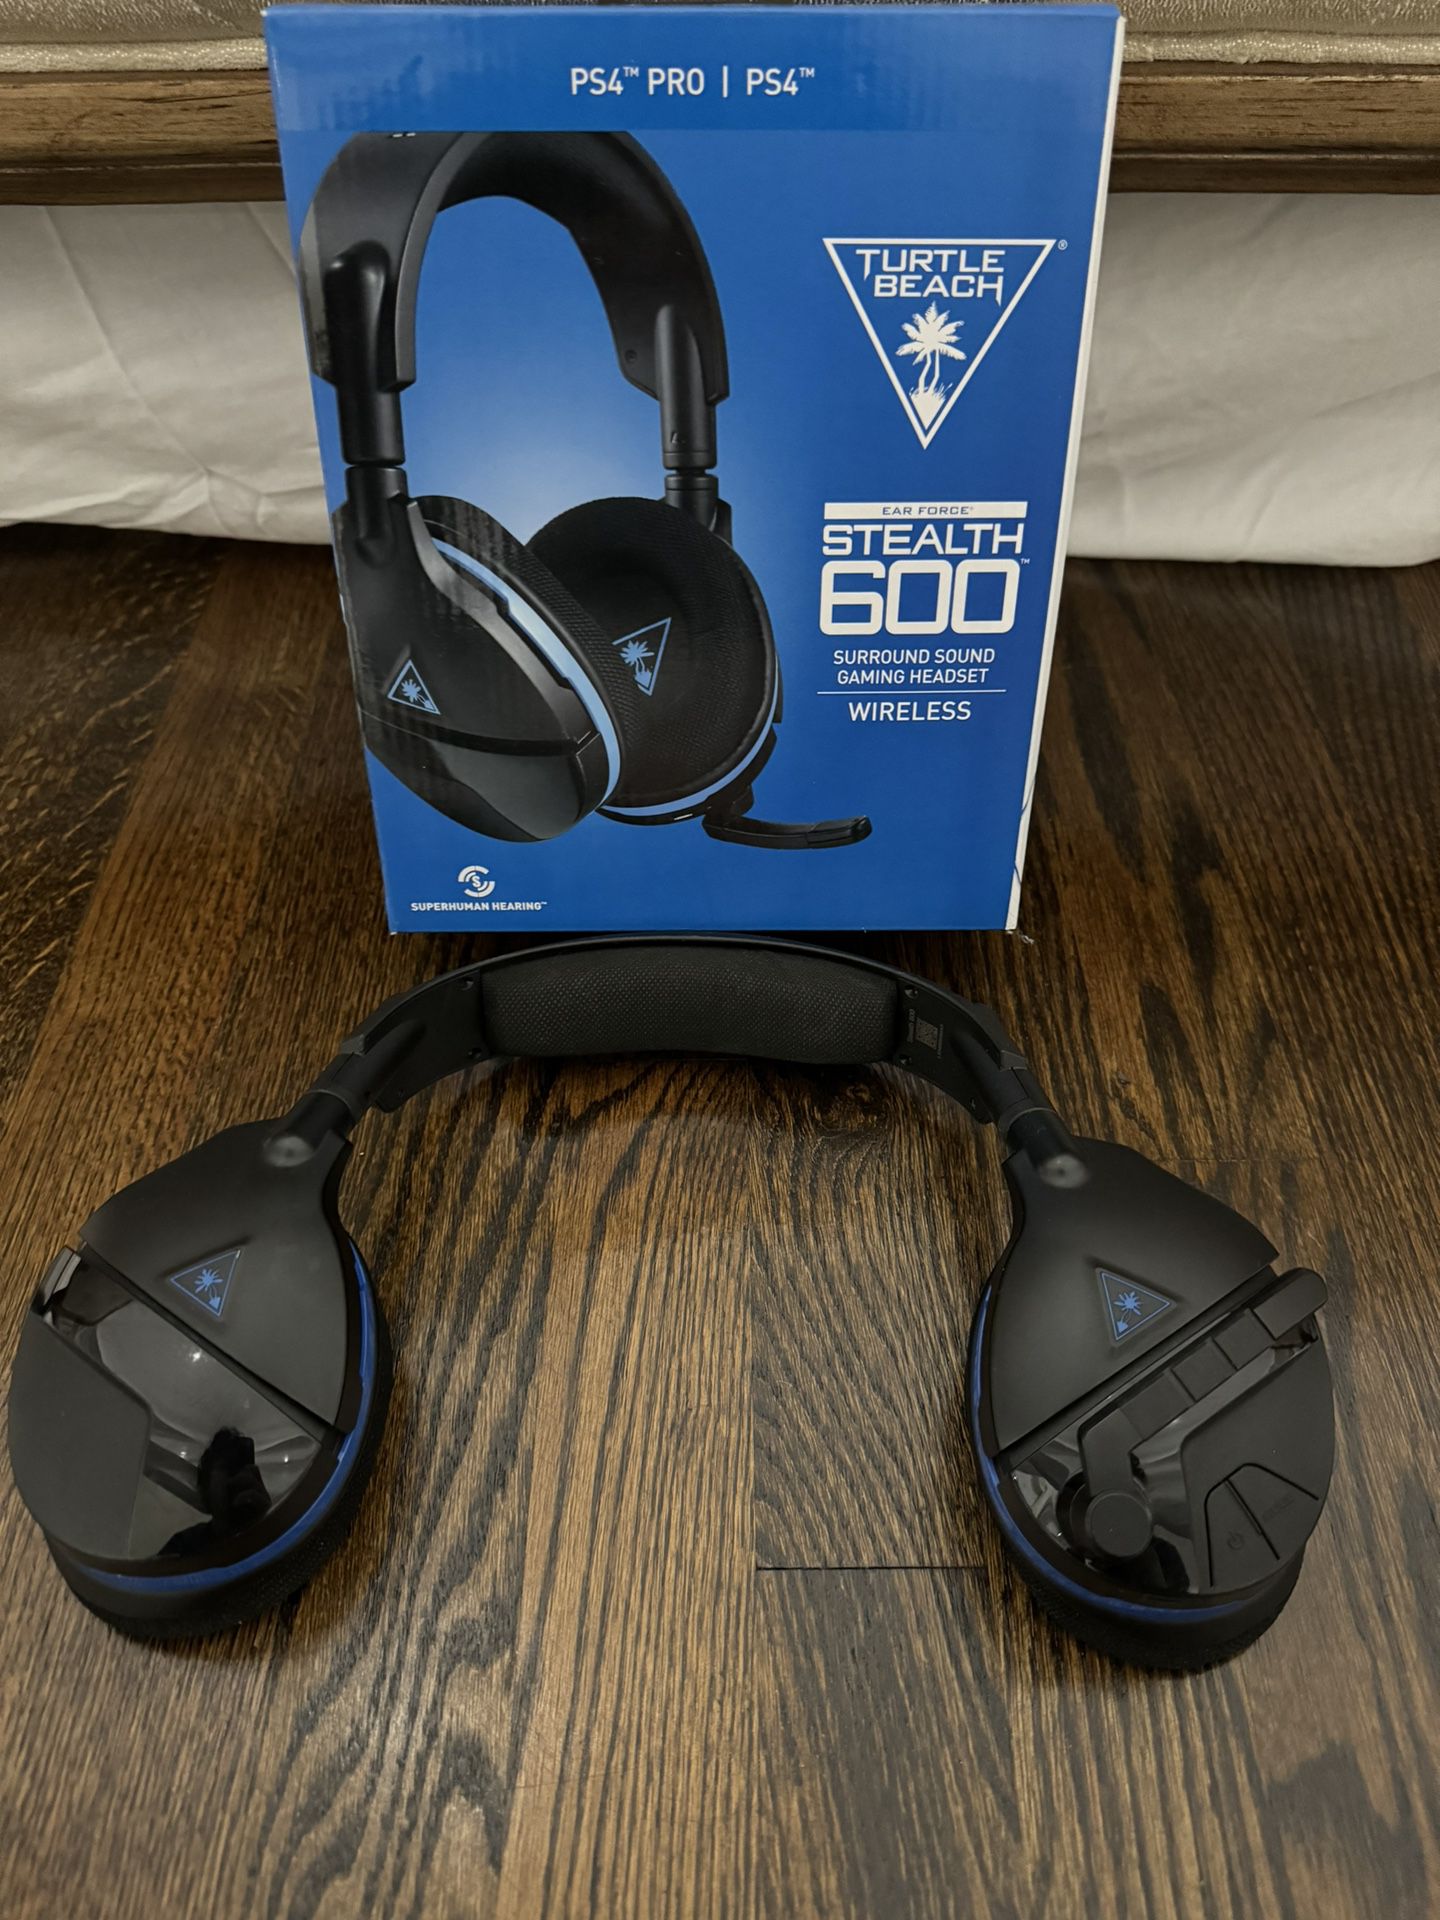 Headset for Playstation 4 (Turtle Beach Stealth 600)